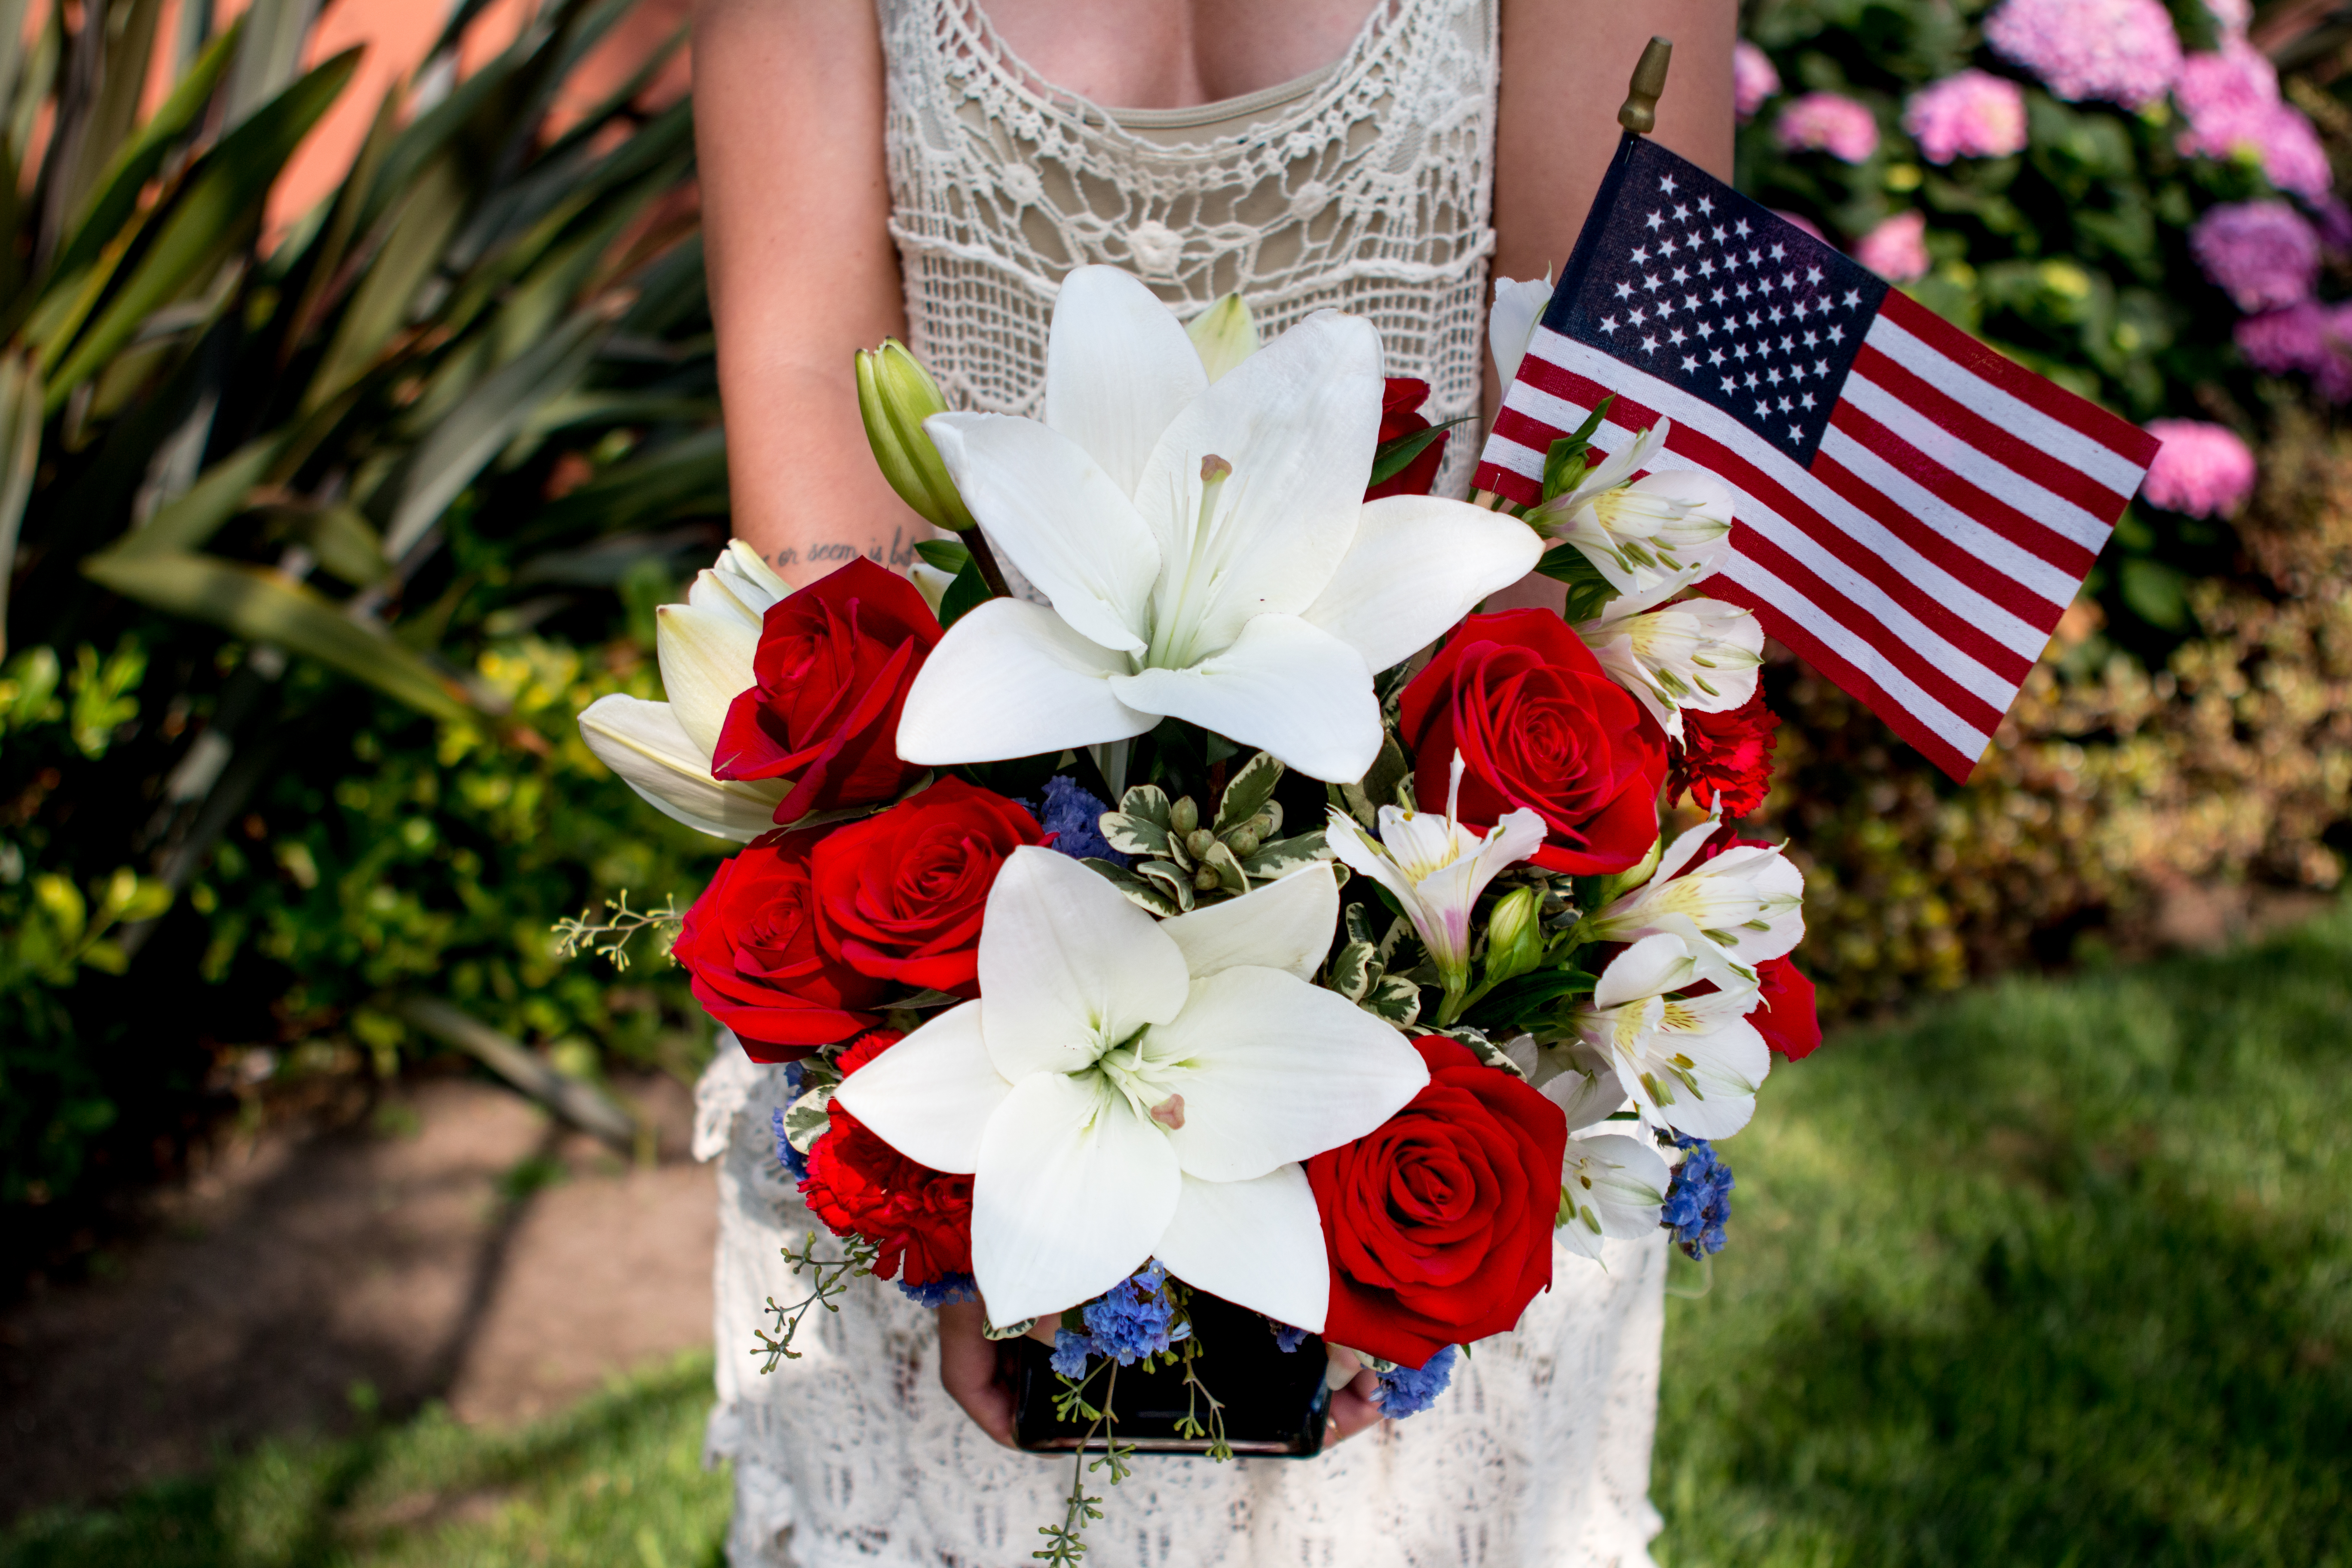 white lilies and red roses in a blue vase with American flag